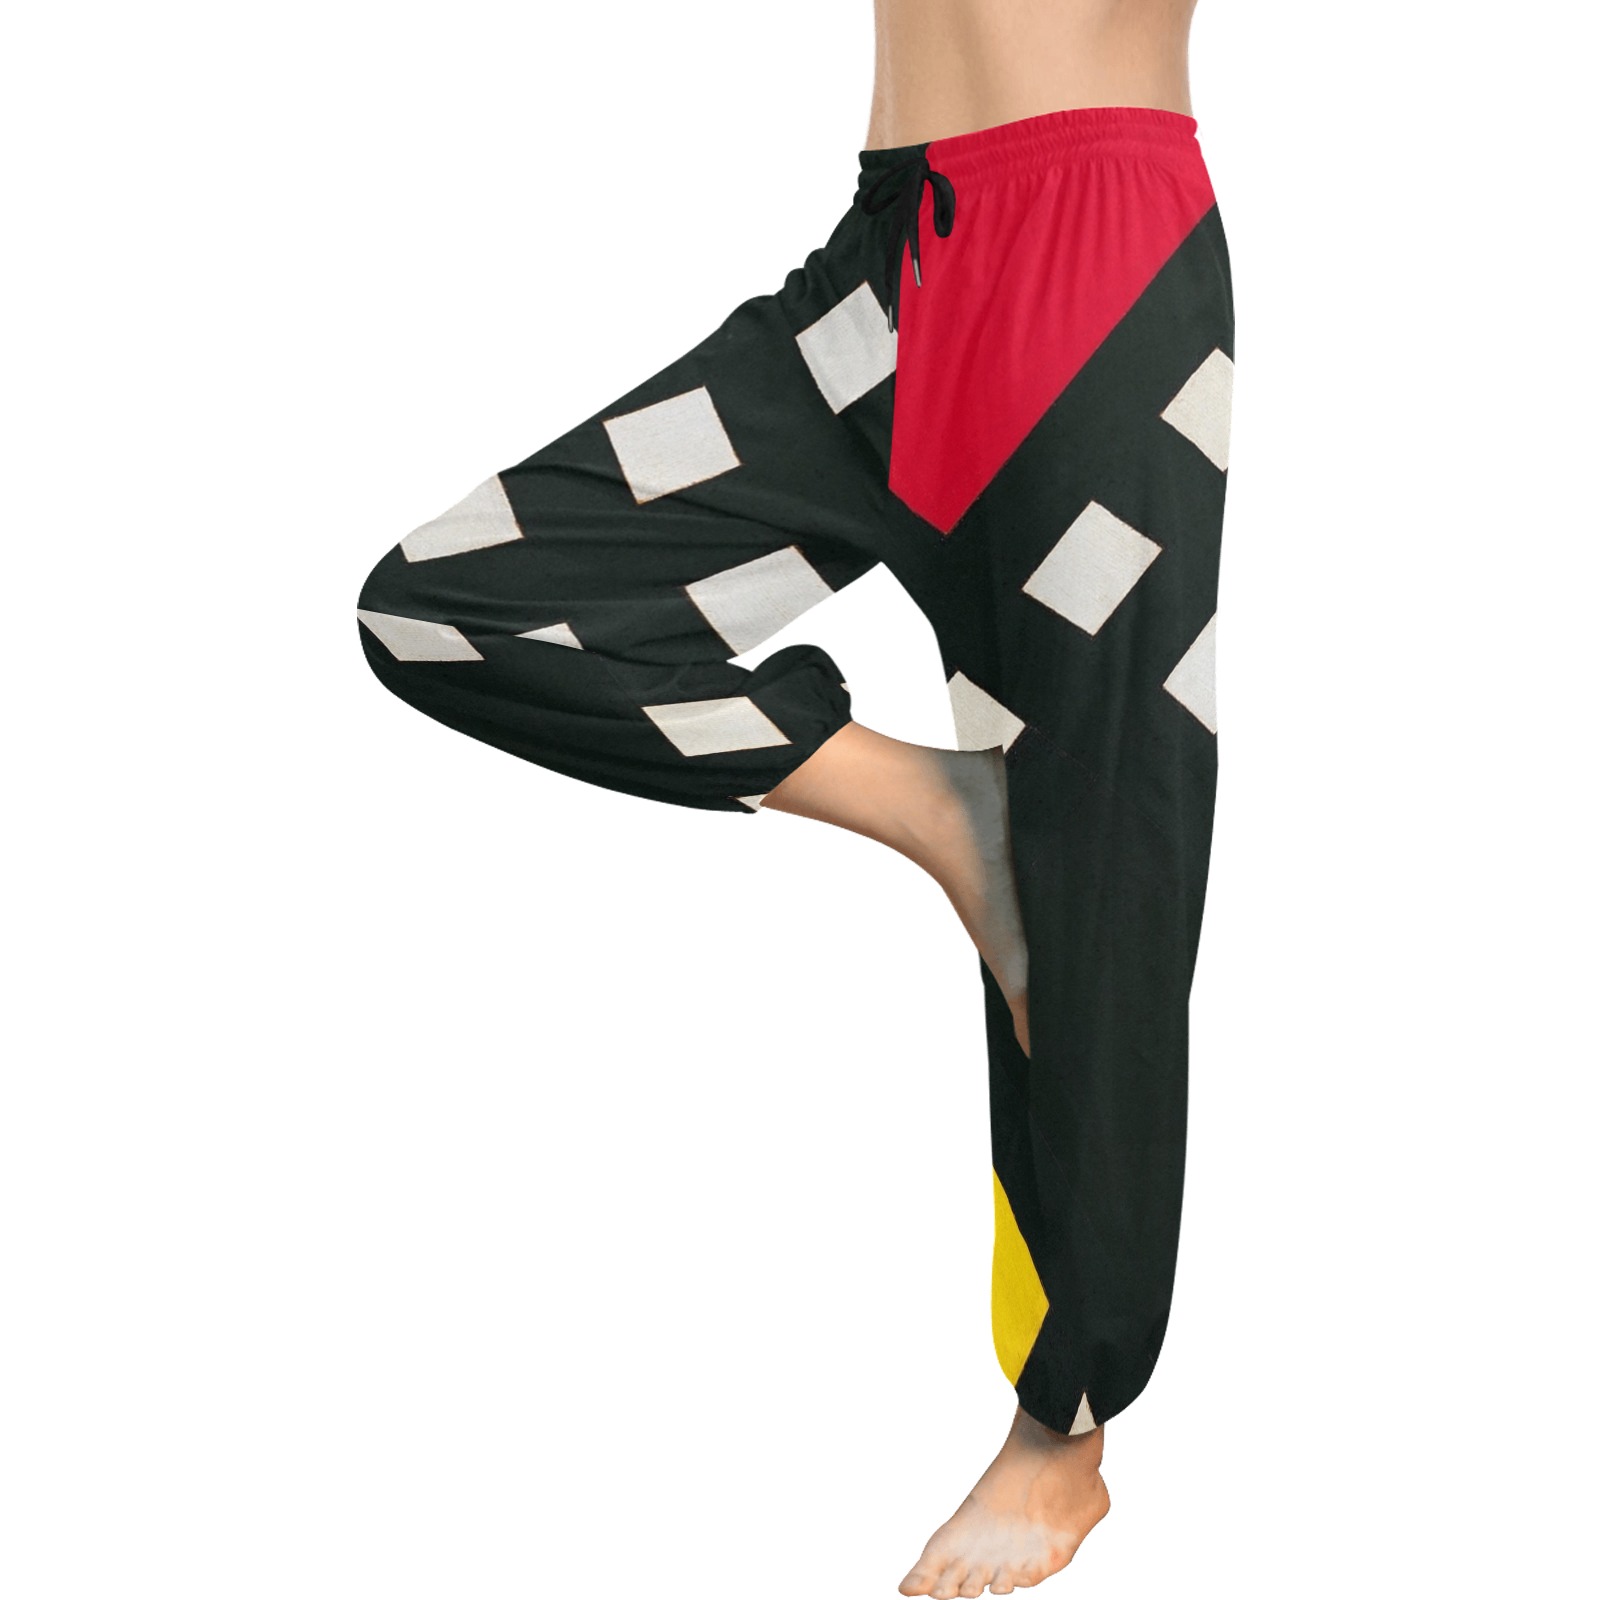 Counter-composition XV by Theo van Doesburg- Women's All Over Print Harem Pants (Model L18)